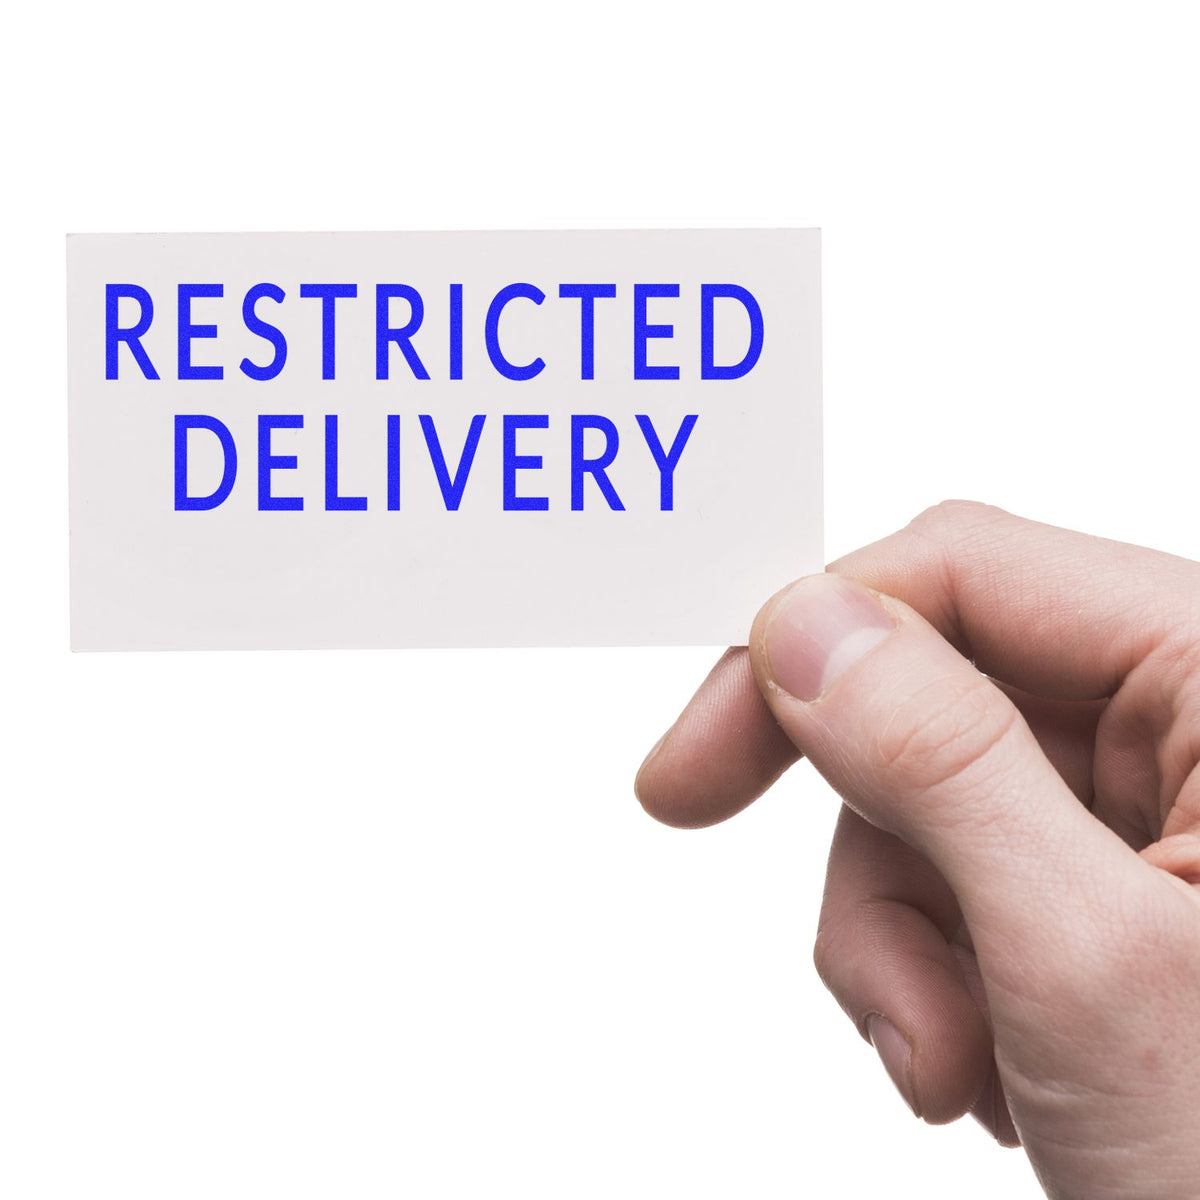 Large Restricted Delivery Rubber Stamp In Use Photo